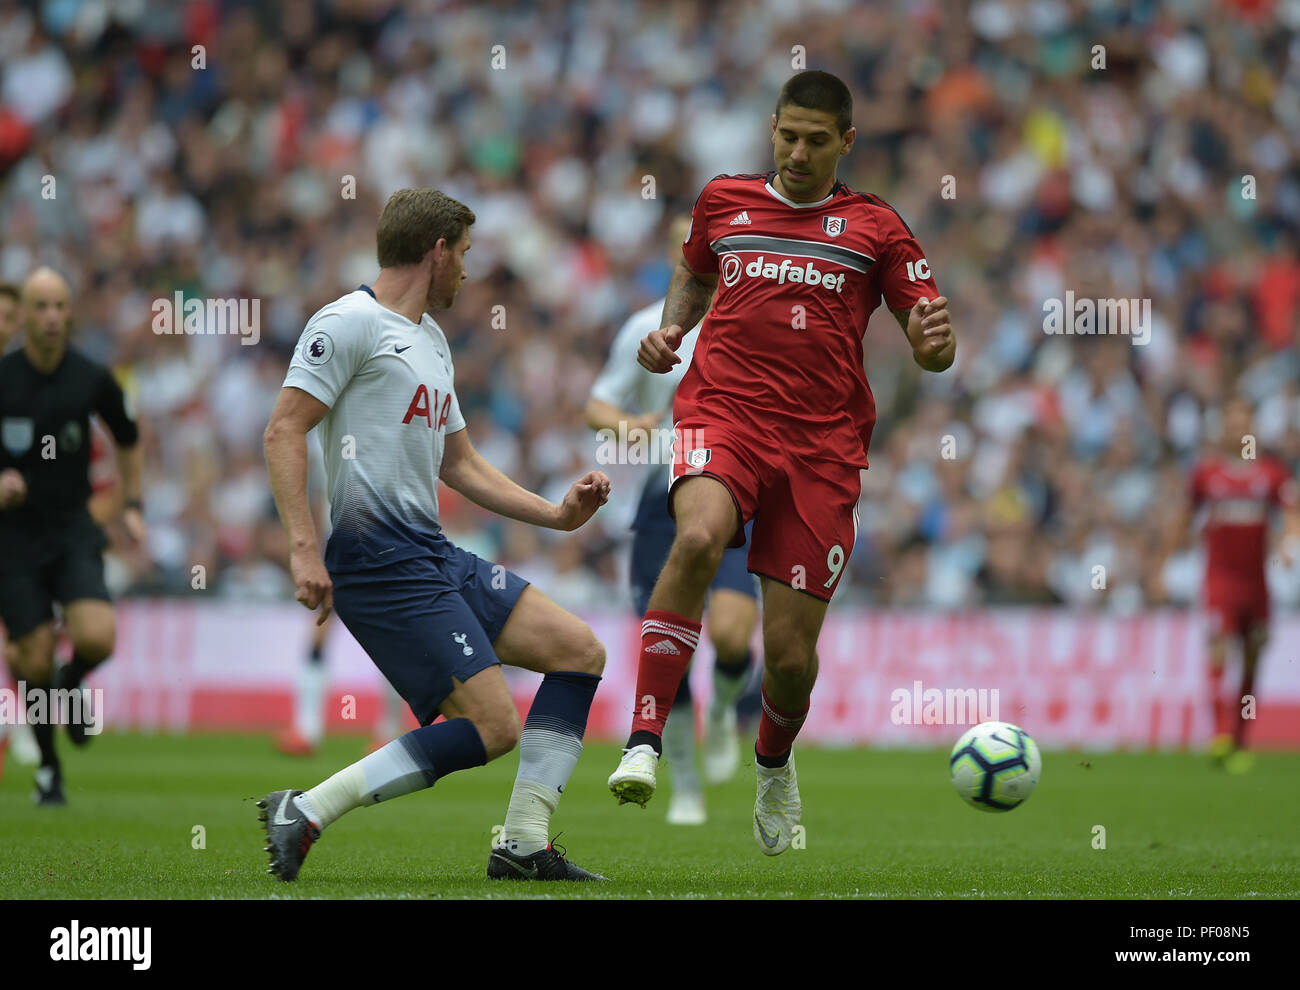 London, UK. 18th August 2018. Jan Vertonghen of Tottenham Hotspur in a clash with Aleksandar Mitrovic of Fulham during the Tottenham Hotspur vs Fulham, Premier League football match 0n 18th August 2018.  EDITORIAL USE ONLY No use with unauthorised audio, video, data, fixture lists (outside the EU), club/league logos or 'live' services. Online in-match use limited to 45 images (+15 in extra time). No use to emulate moving images. No use in betting, games or single club/league/player publications/services. Credit: MARTIN DALTON/Alamy Live News Stock Photo